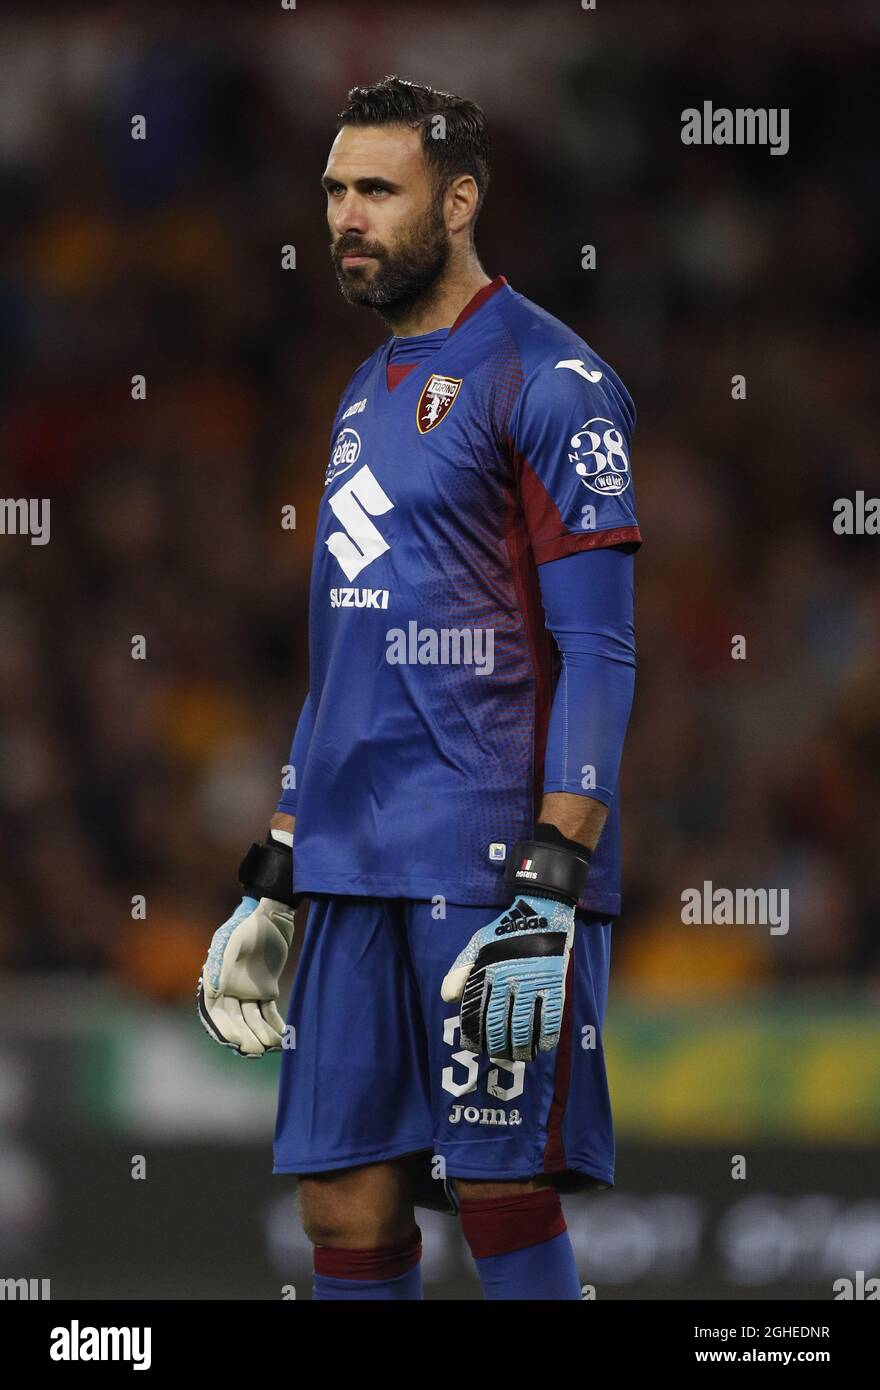 Salvatore Sirigu of Torino during the UEFA Europa League match at Molineux, Wolverhampton. Picture date: 29th August 2019. Picture credit should read: Darren Staples/Sportimage via PA Images Stock Photo